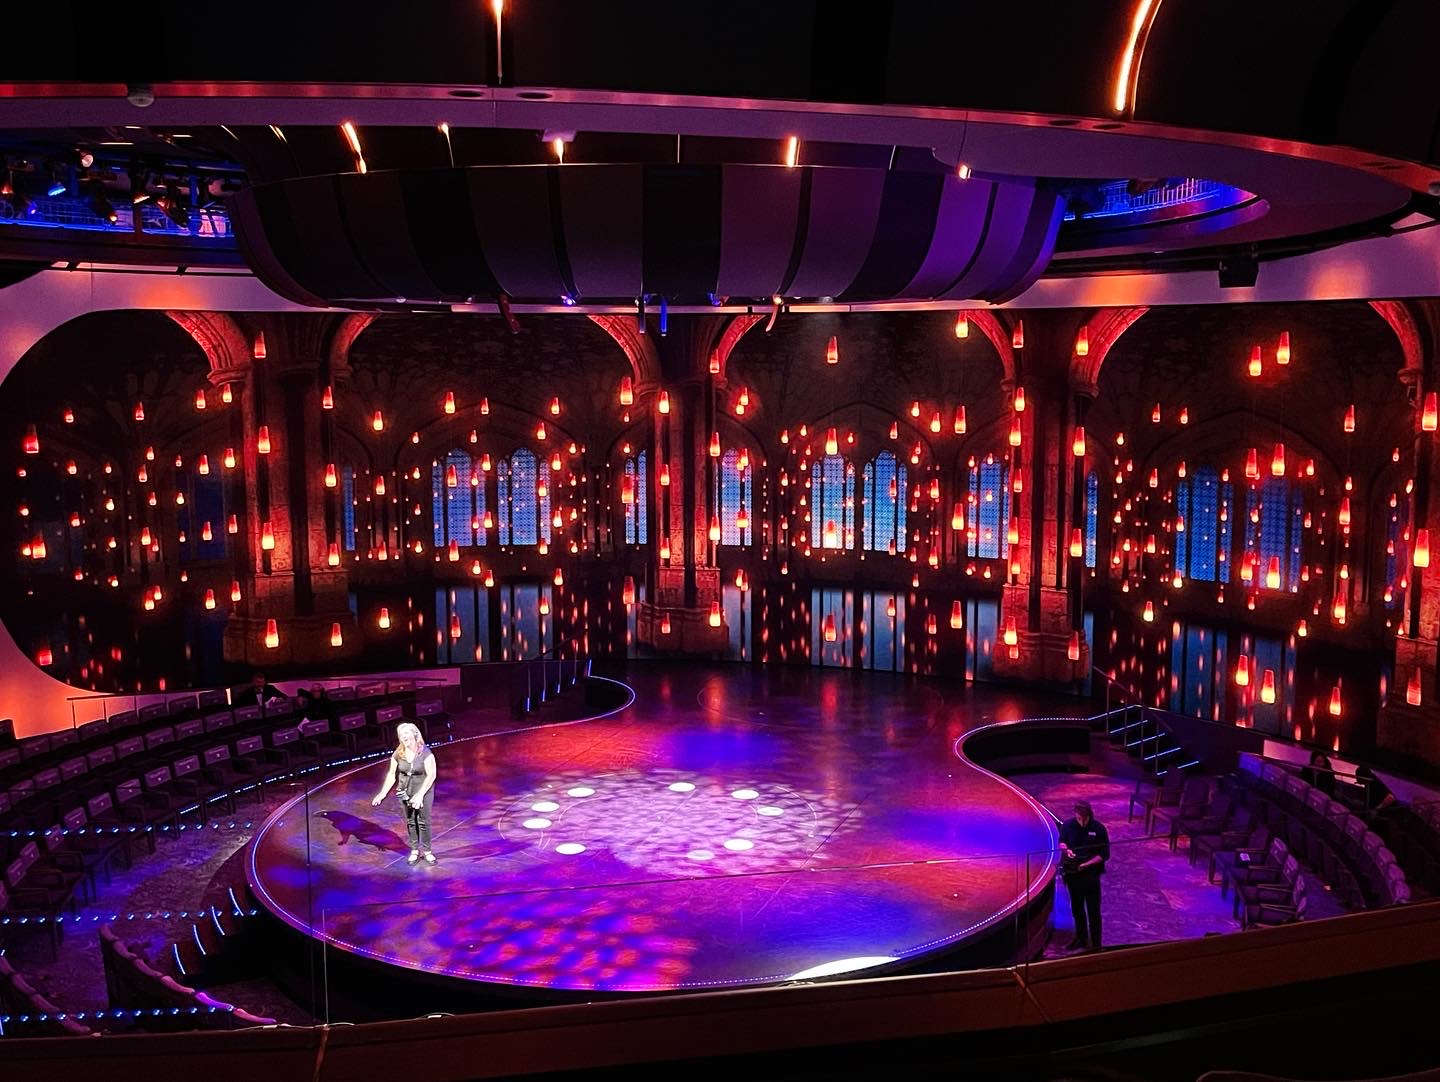 A theater with a circular stage bathed in blue and red lights, surrounded by tiered seating, and a person standing in the spotlight.